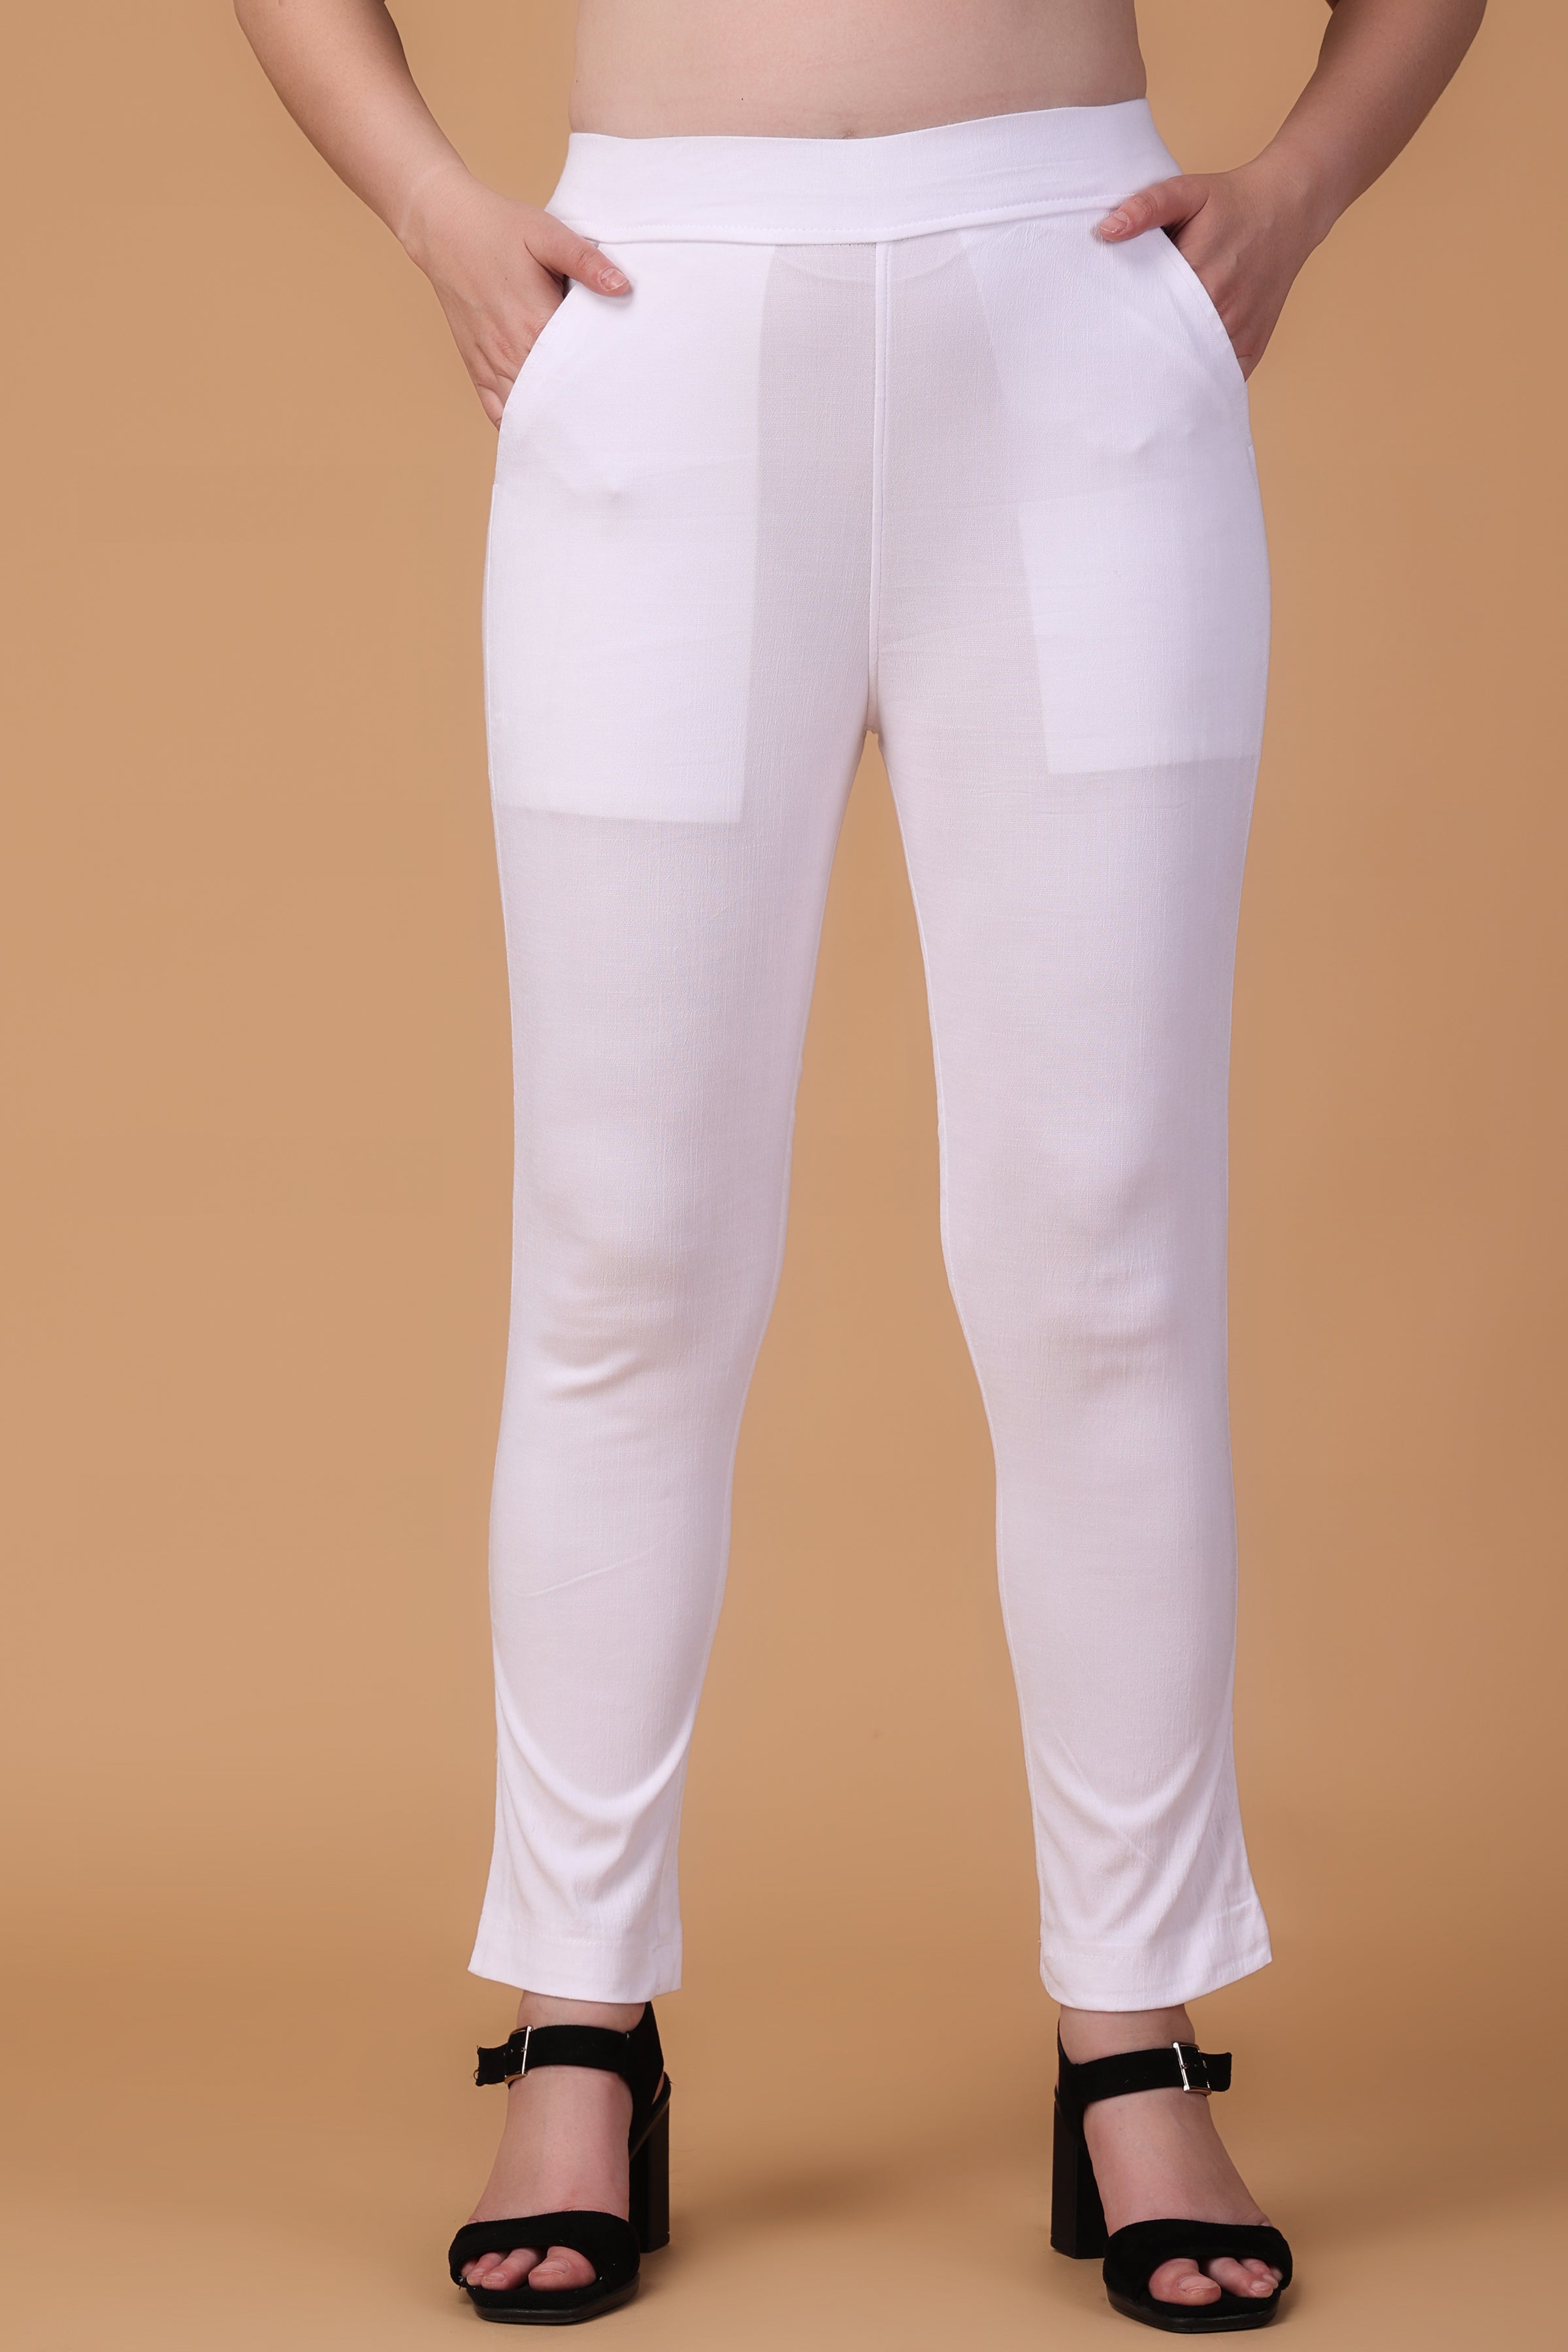 Ladies Cotton Lycra Pant at Best Price in New Delhi | Essence Outfit India  Pvt. Ltd.